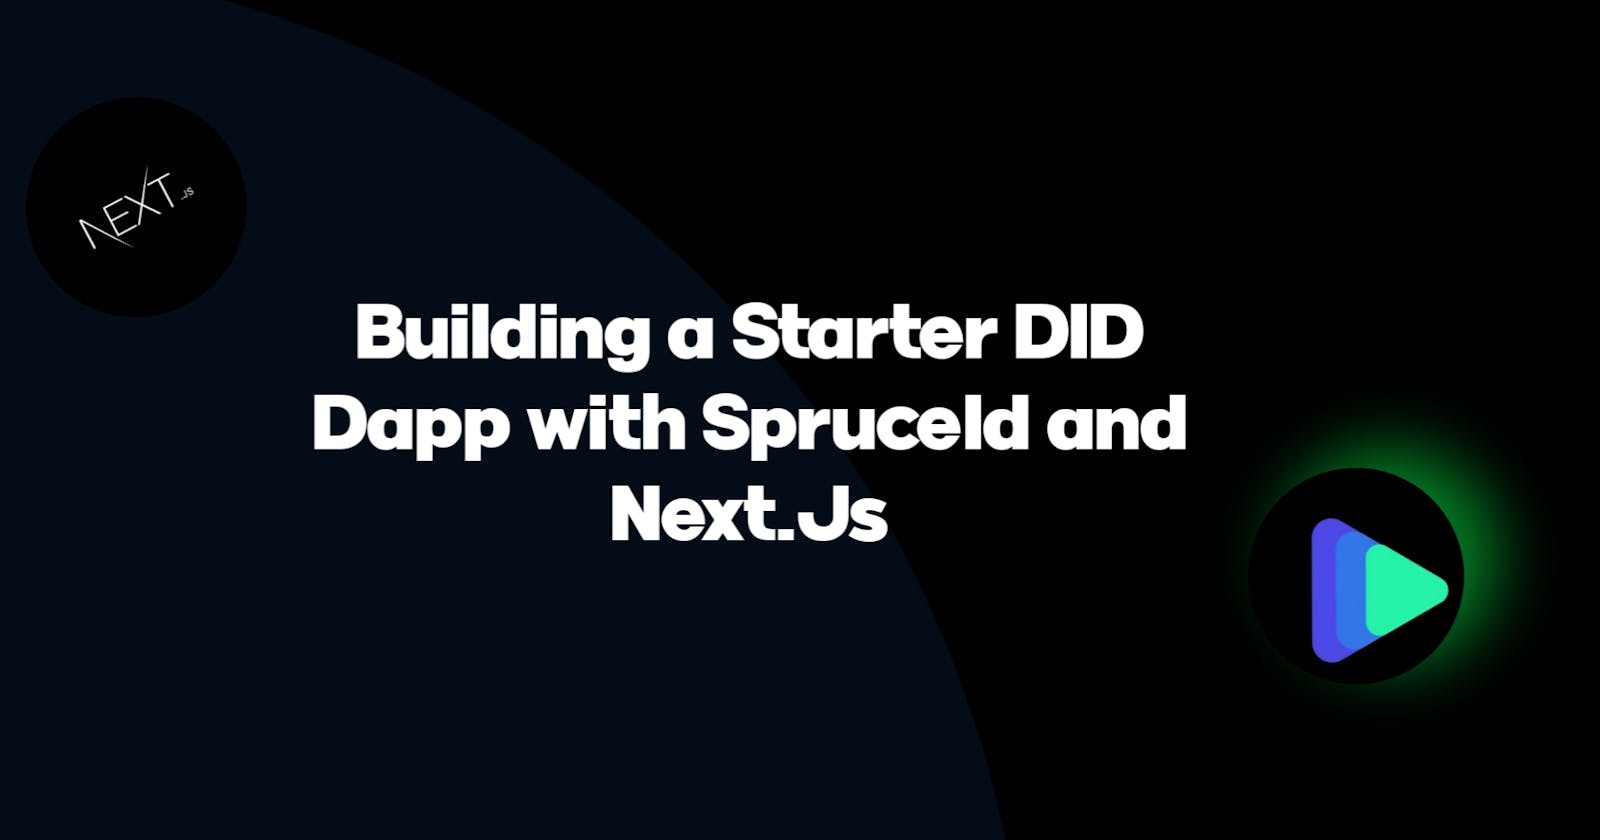 Building a DID Starter Dapp with Spruce and NextJs